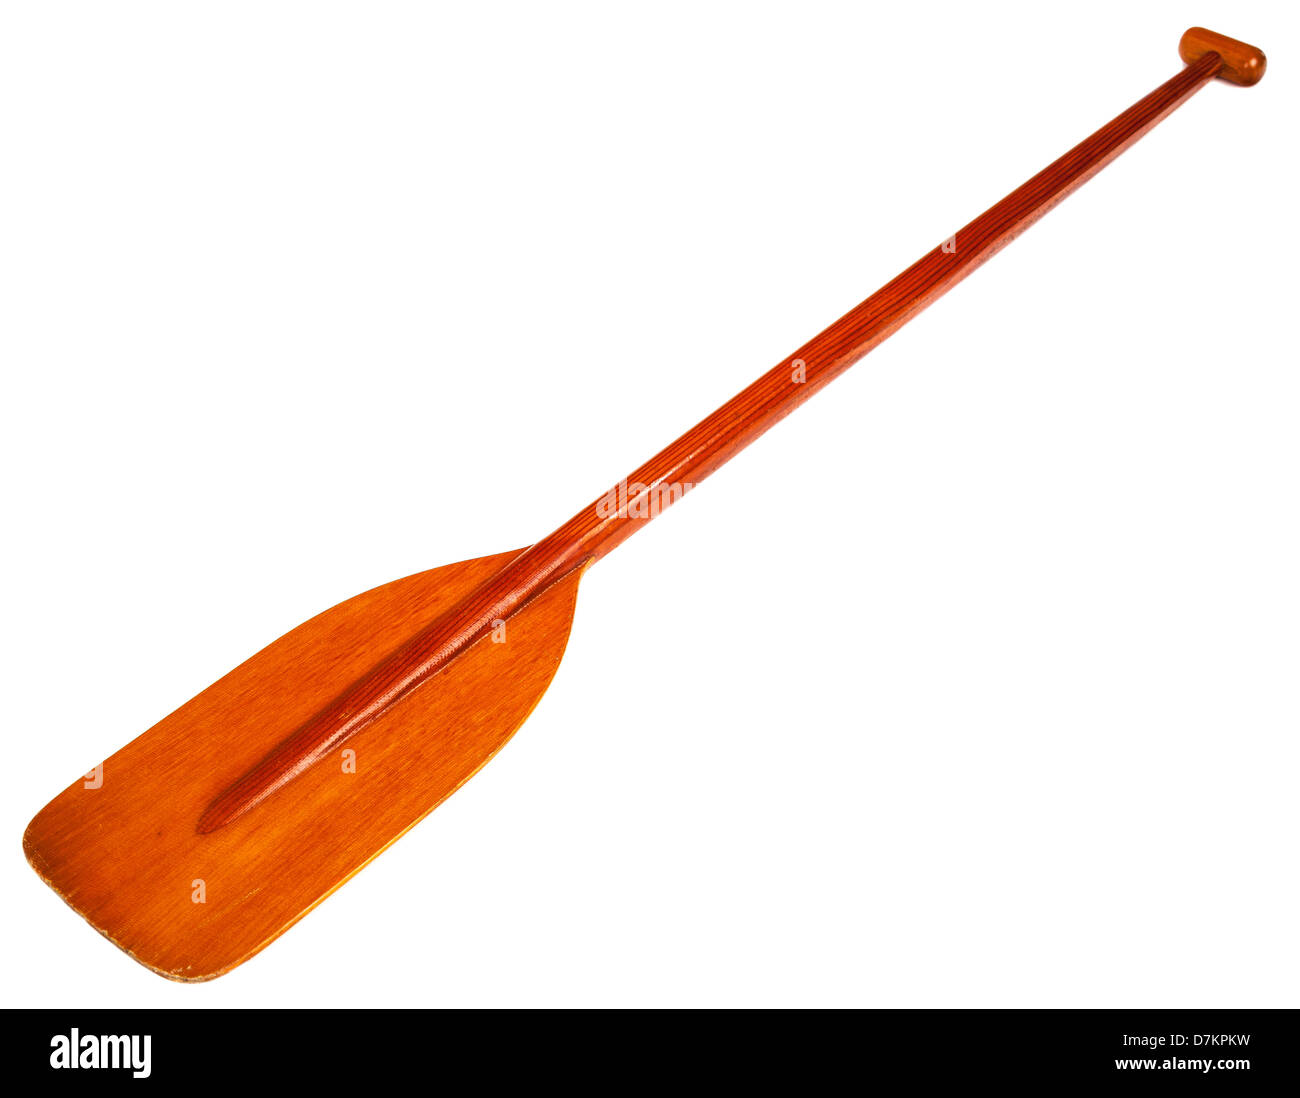 old wooden canoe paddle with a blade reinforced by fiberglass Stock Photo